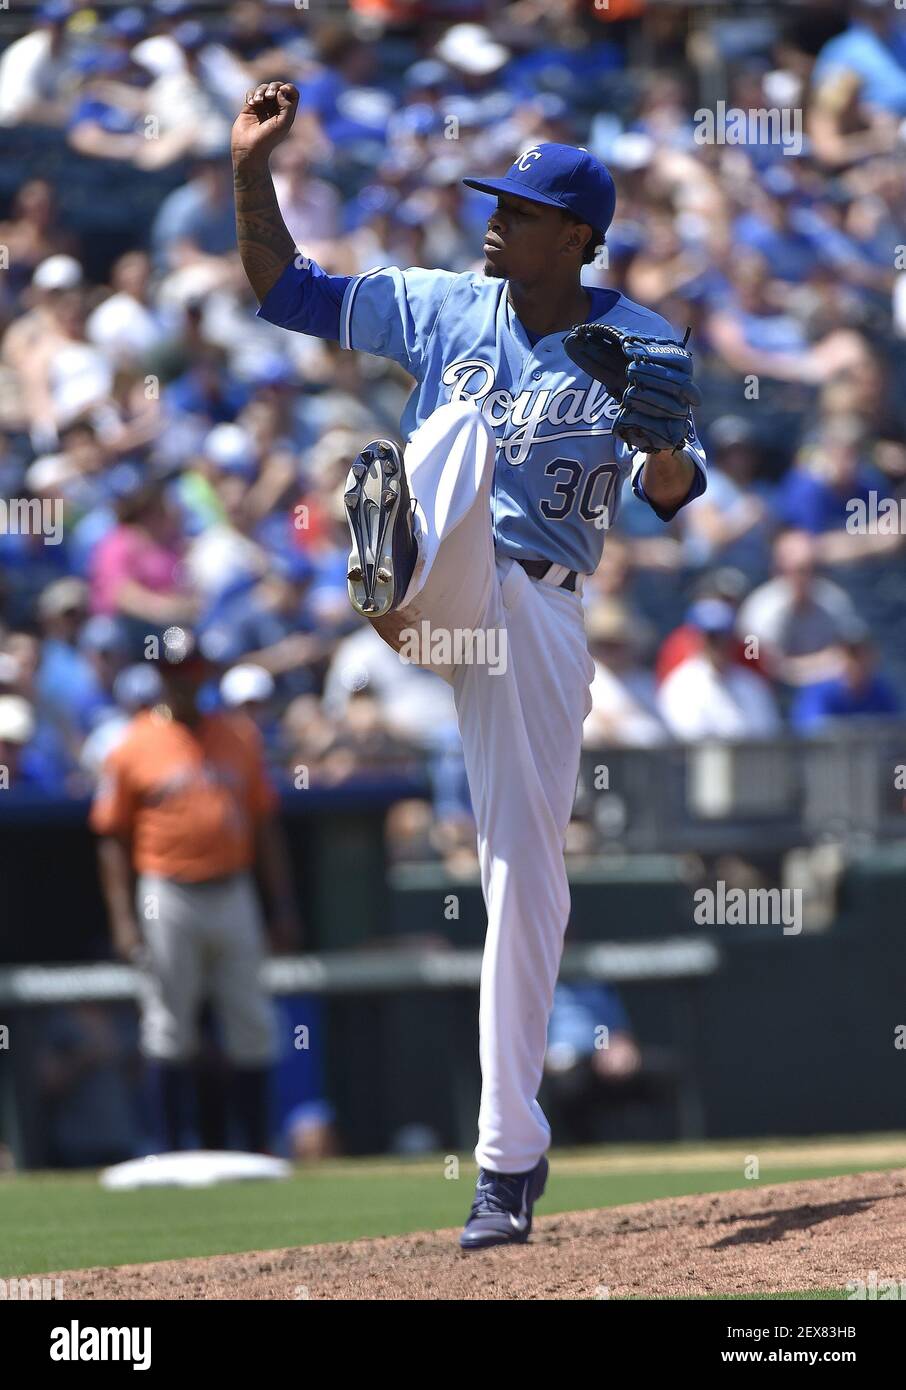 Kansas City Royals starting pitcher Yordano Ventura (30) high kicks on the  follow through as Houston Astros' Carlos Correa flied out to end the top of  the fifth inning during Sunday's baseball